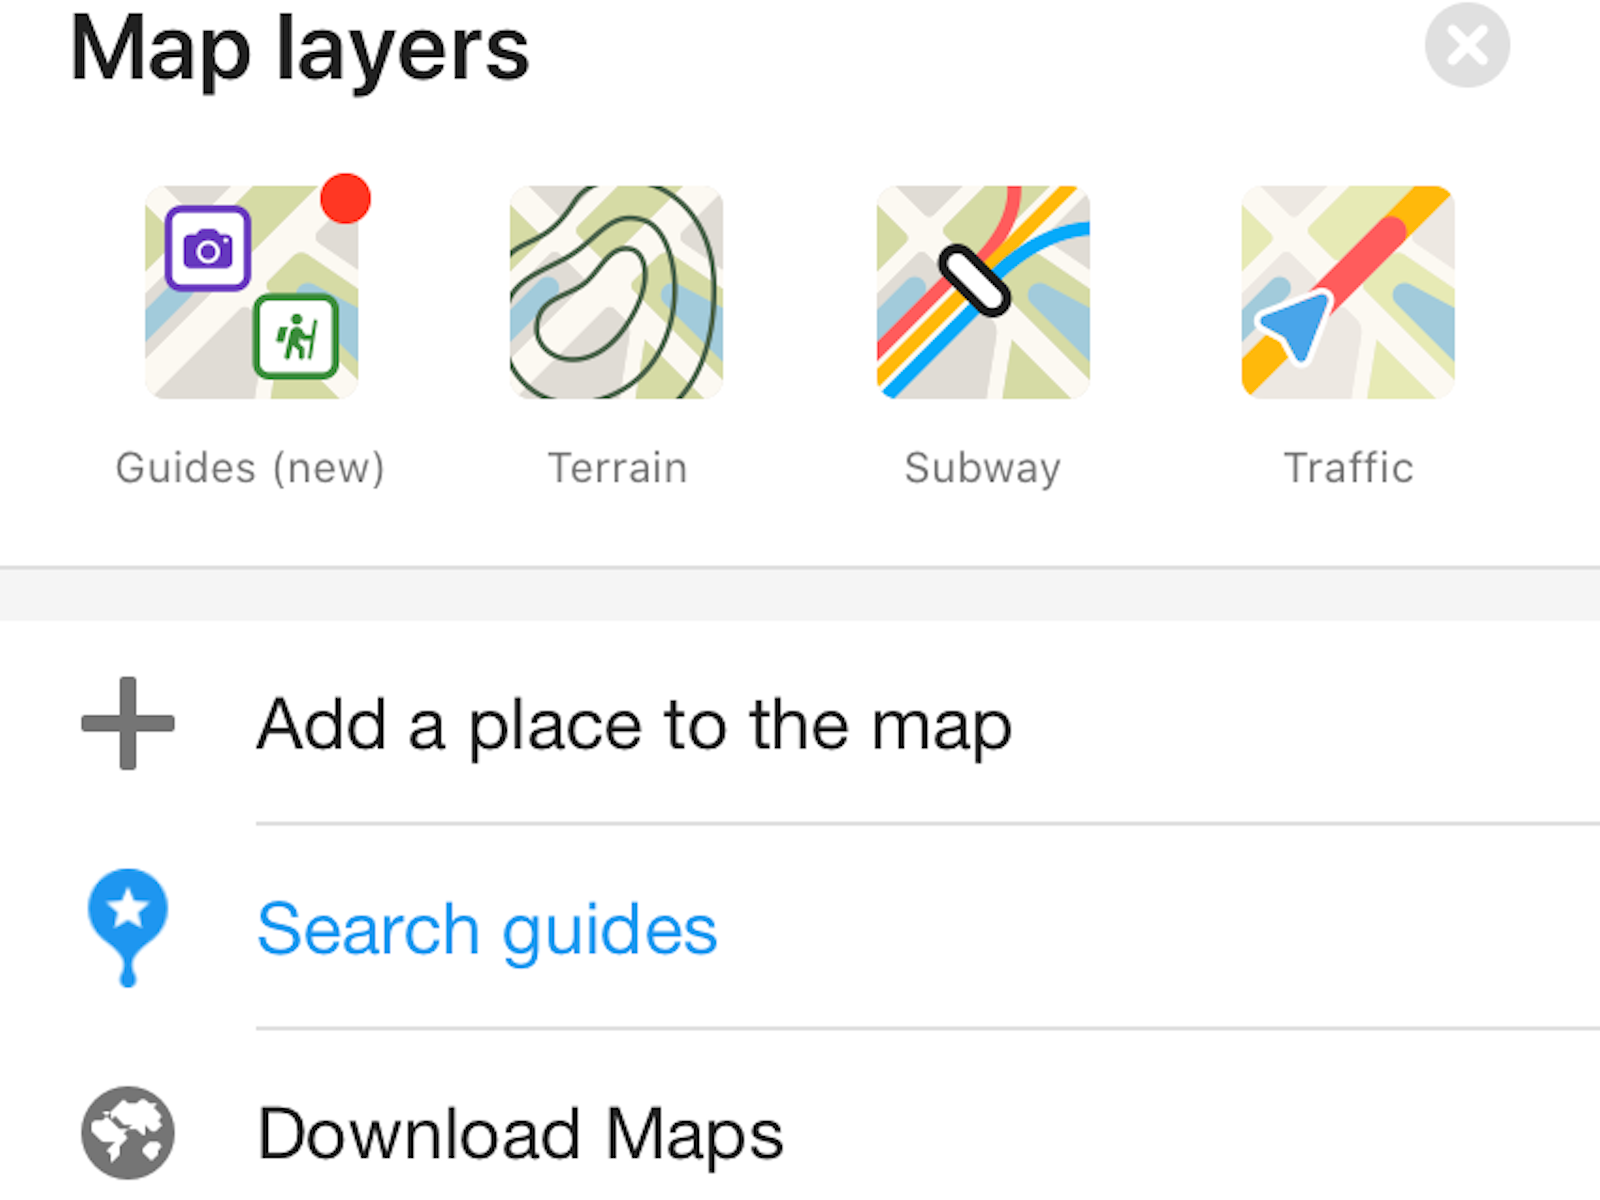 Use Maps.me during your trip to not get lost